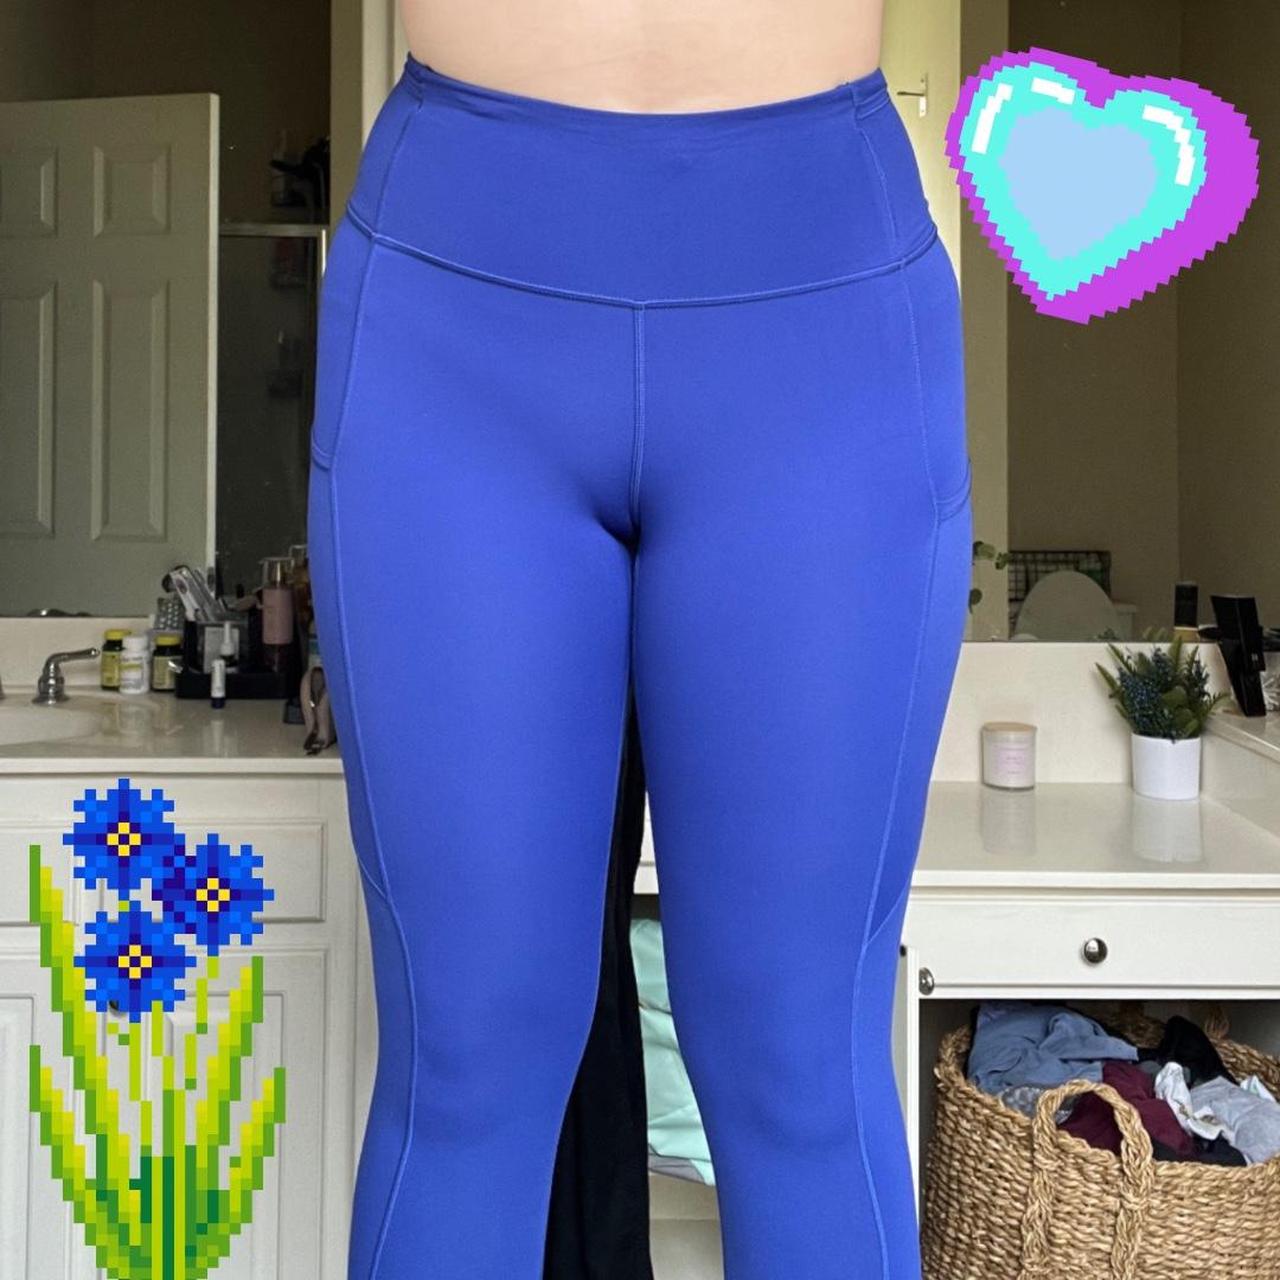 I think these lululemon leggings are the fast and - Depop